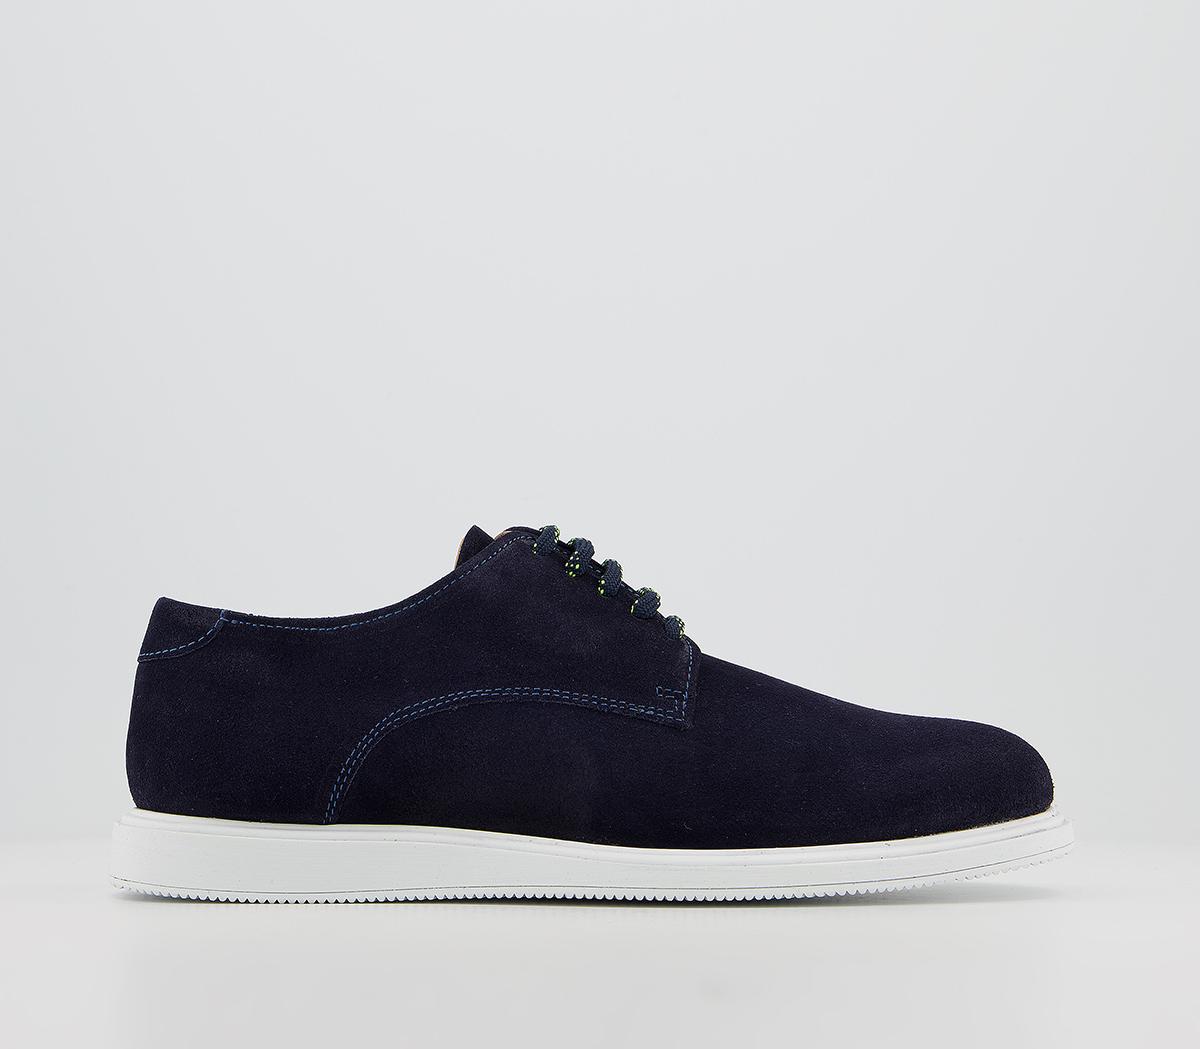 OFFICECaleb Derby White Sole ShoesNavy Suede